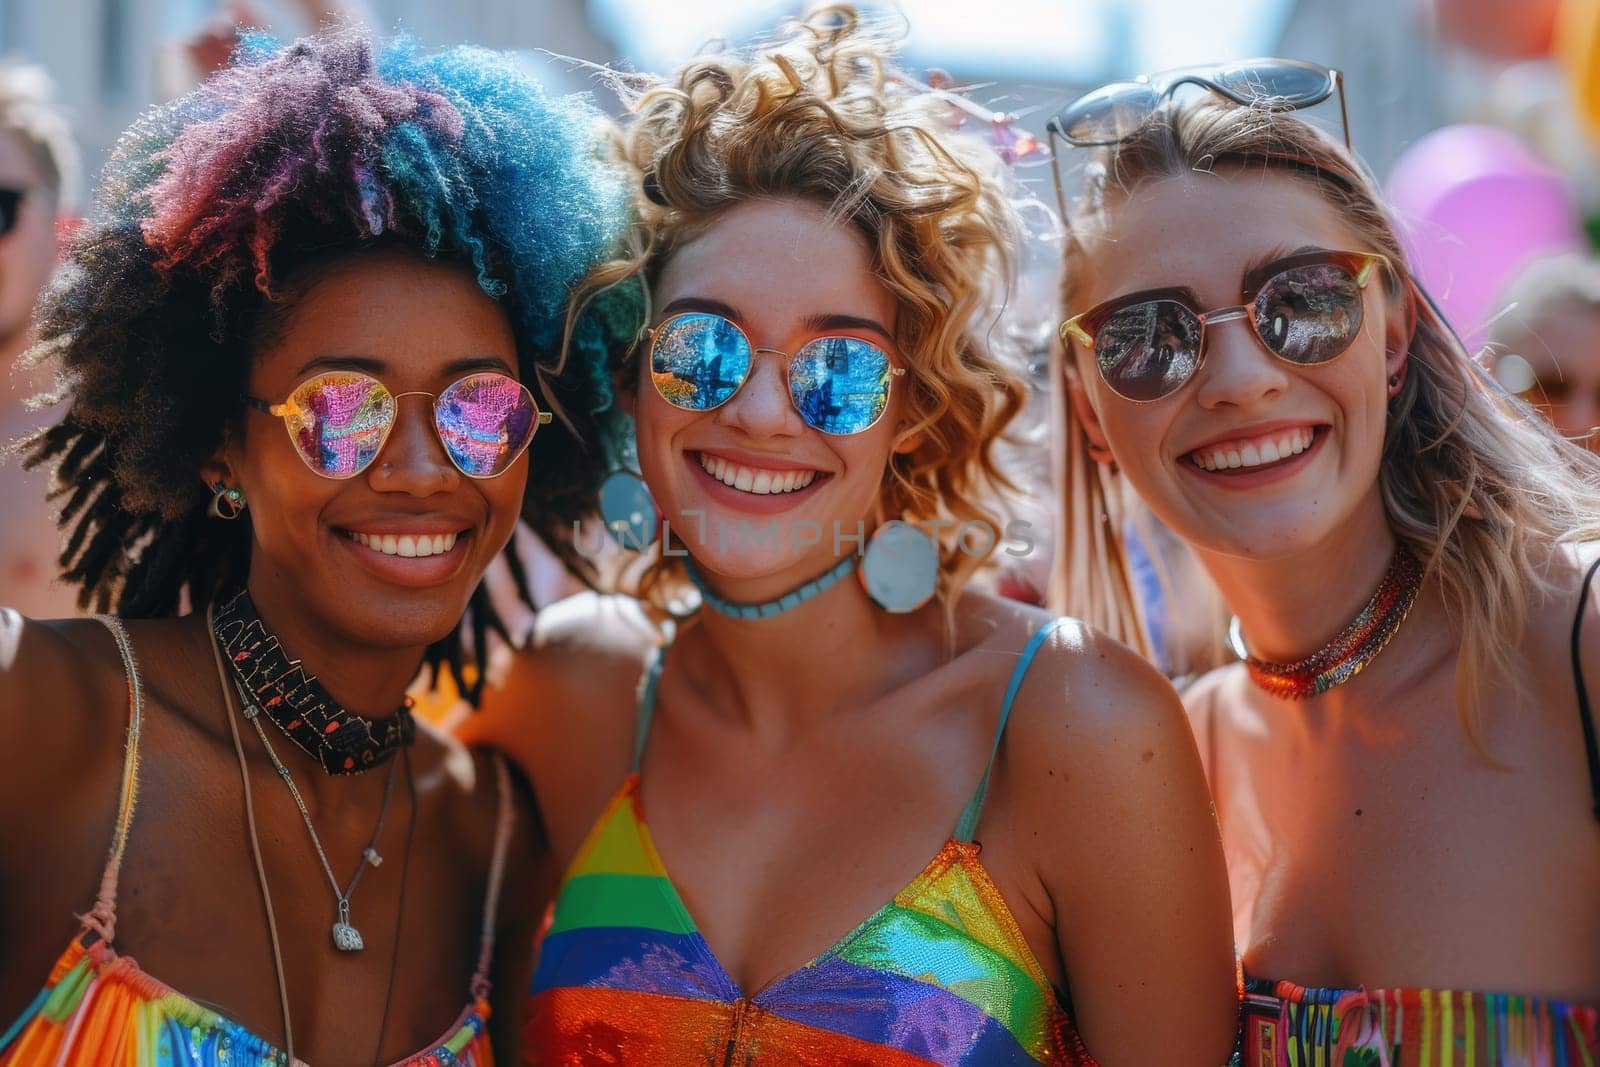 Three women wearing rainbow clothing and sunglasses are smiling for the camera. Scene is happy and celebratory, as the women are posing for a photo together